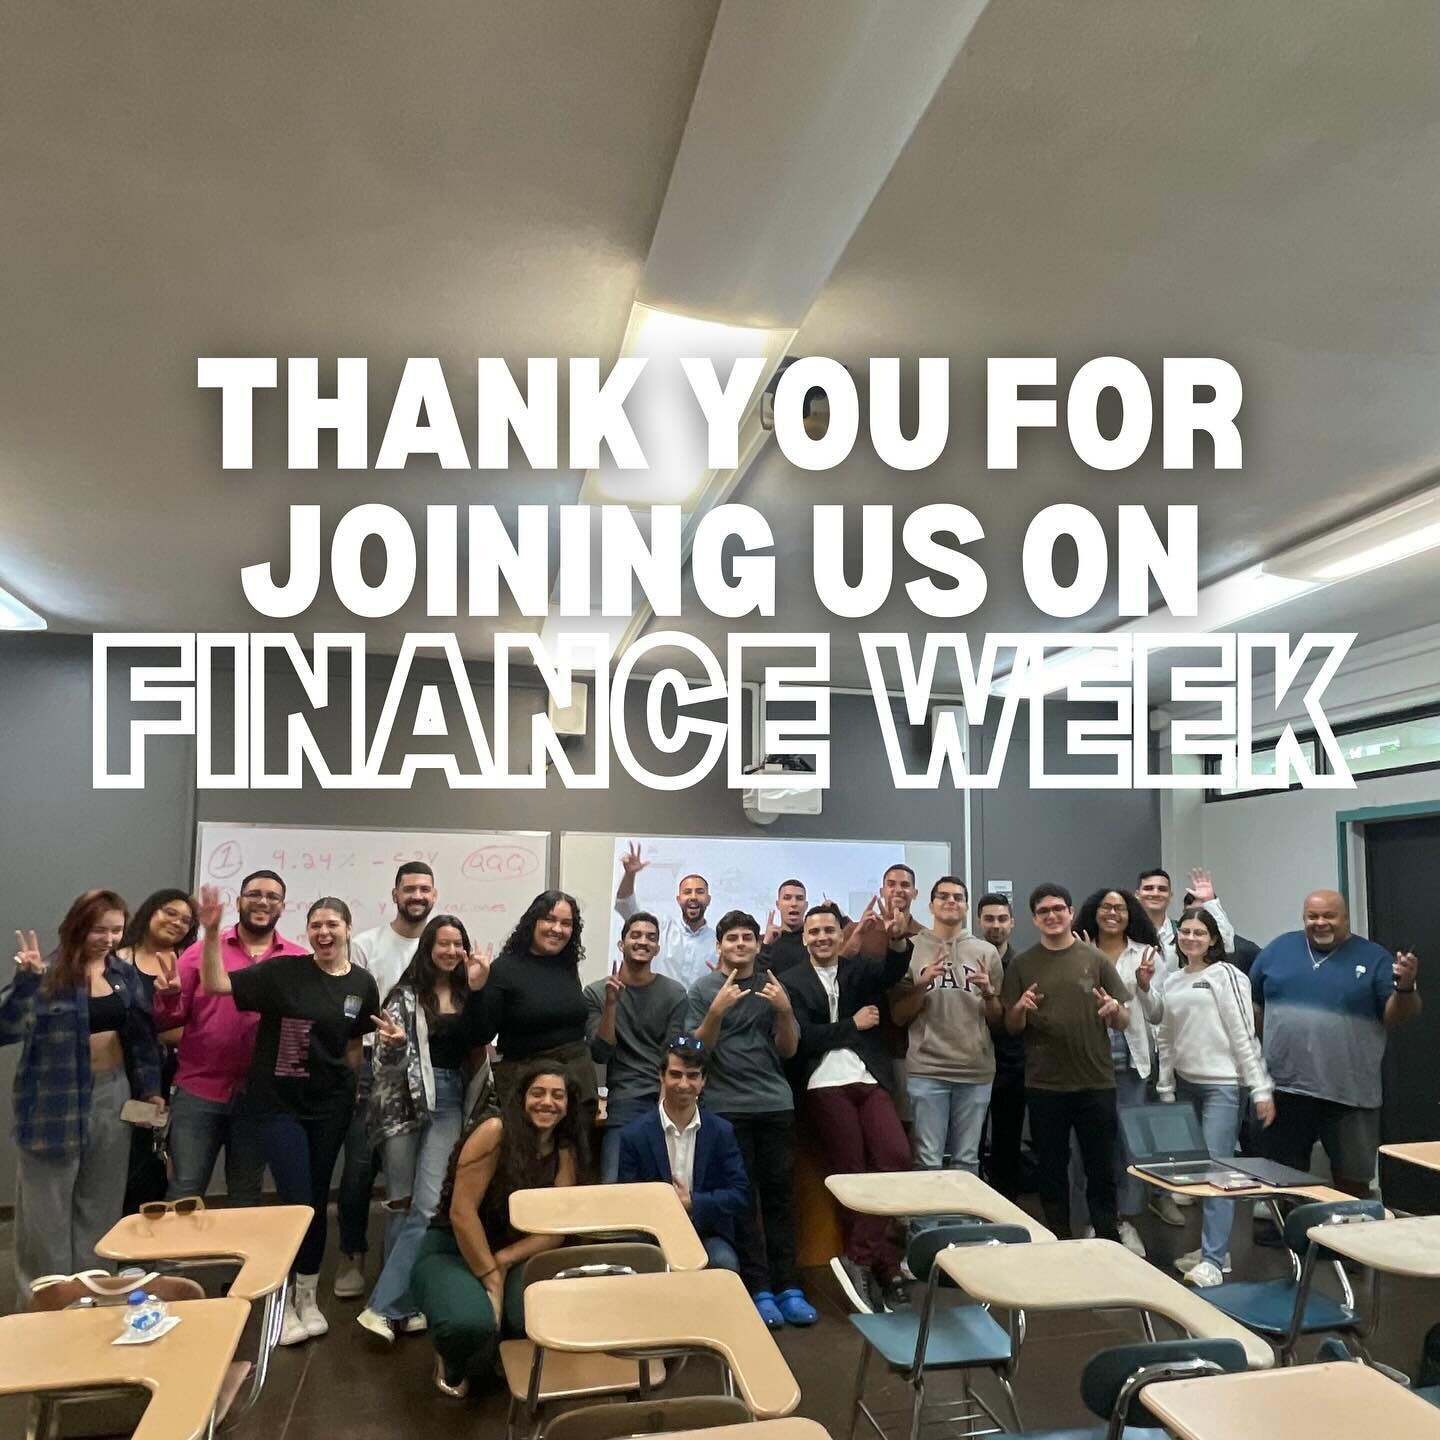 What a week full of finance wisdom!!! Thank you to our speakers @schindler_kurt , @richarddeinfusion and @lysbellaraujo that shared this amazing insights of the finance world. Appreciated all the members that wanted to improve their finance knowledge